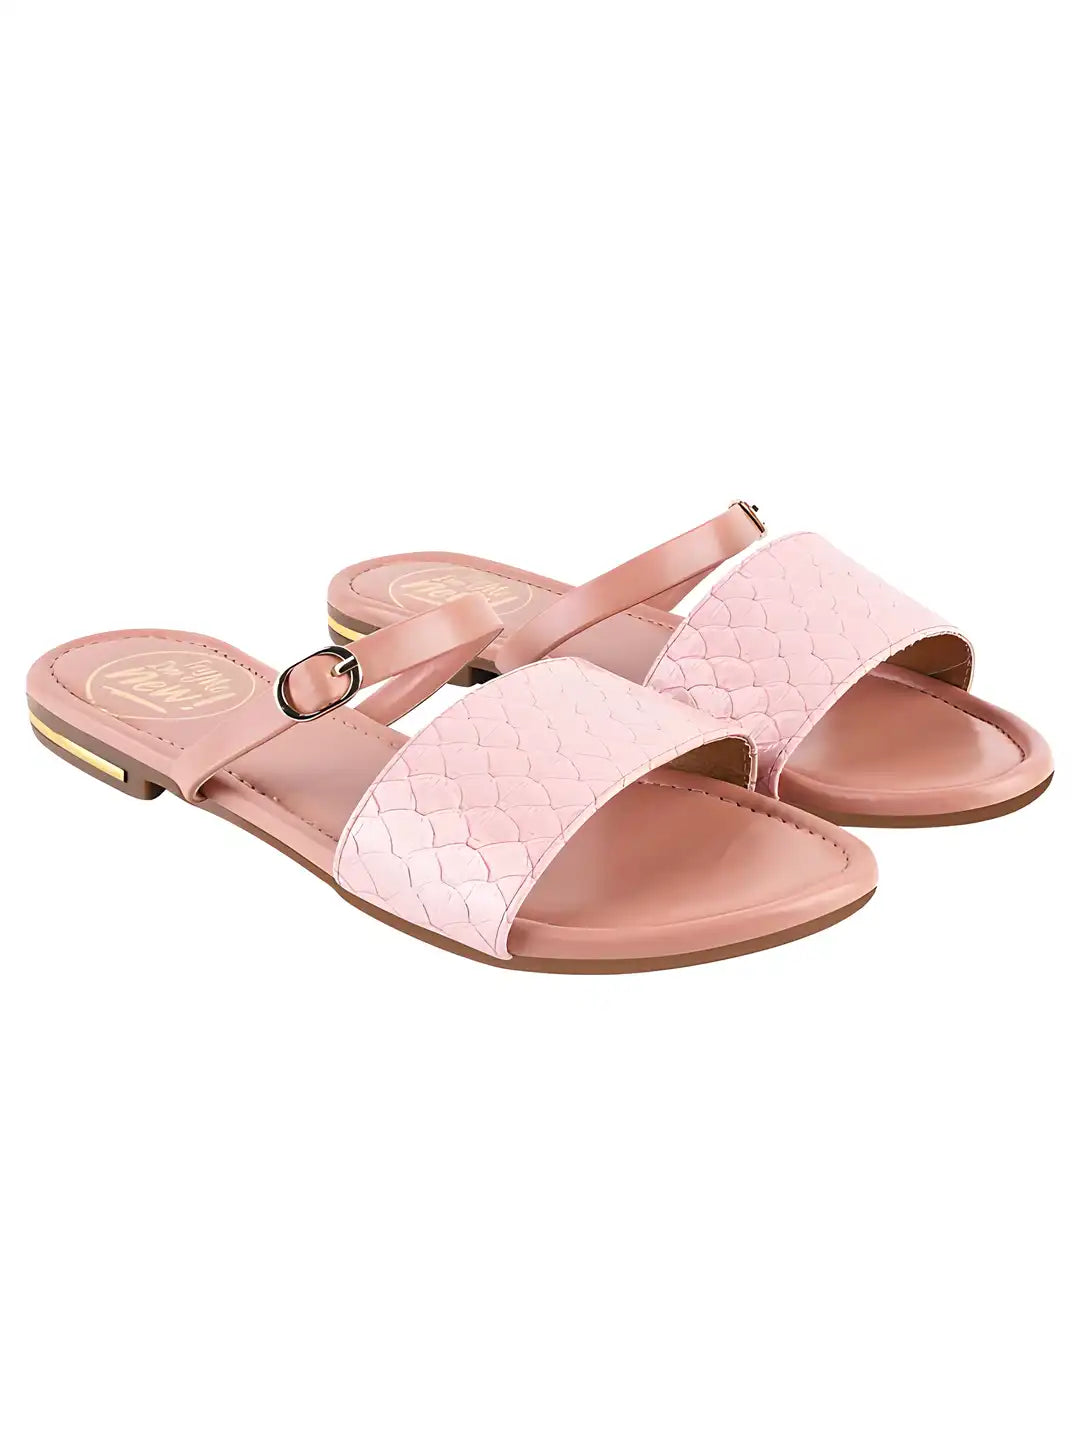 Comfortable And Stylish Flat Sandal For Women's